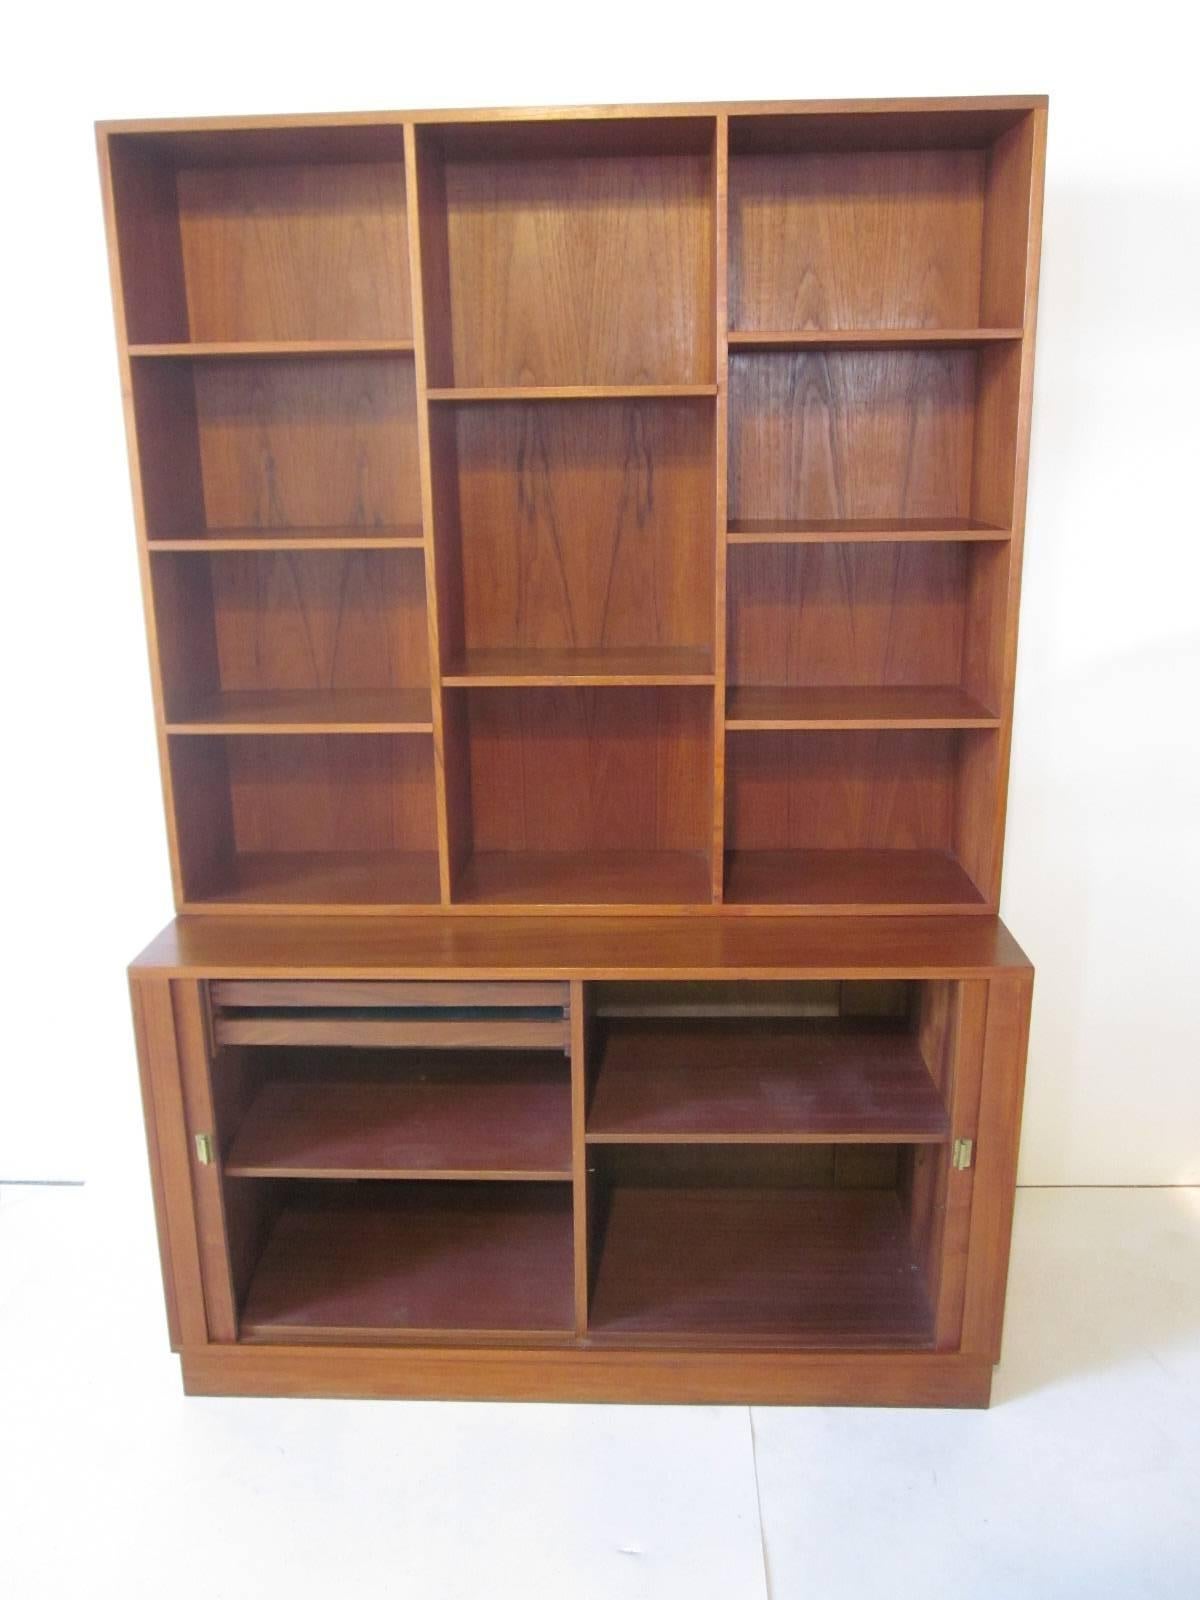 A tambour door two-piece teakwood bookcase and credenza with eight adjustable shelves and lower pull out drawers and adjustable shelves for storage and brass toned metal pulls. Manufactures mark to both pieces with ink stamp date of 1965 and branded